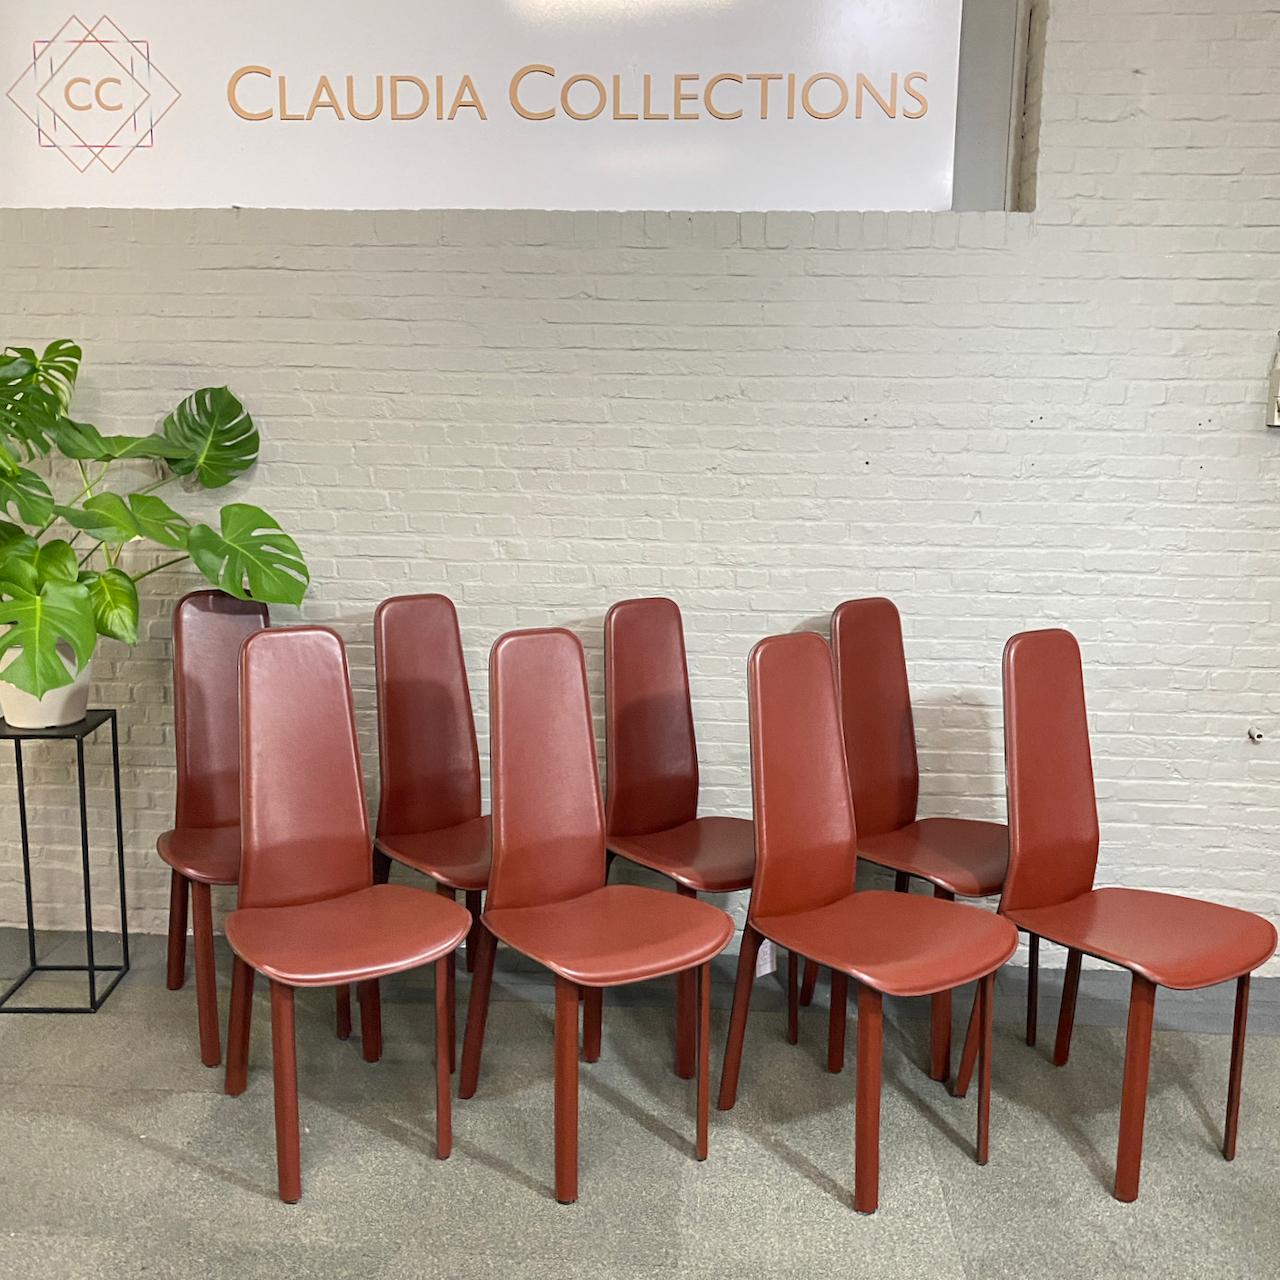 SET OF 8 FULL SADDLE LEATHER CIDUE ITALIA DINING CHAIRS - ITALY 1980s
Set of 8 stunning high-back dining chairs by Cidue Italia.
The steel frame is fully covered in cognac colored saddle leather.
Original label underneath the chairs.

Designer: